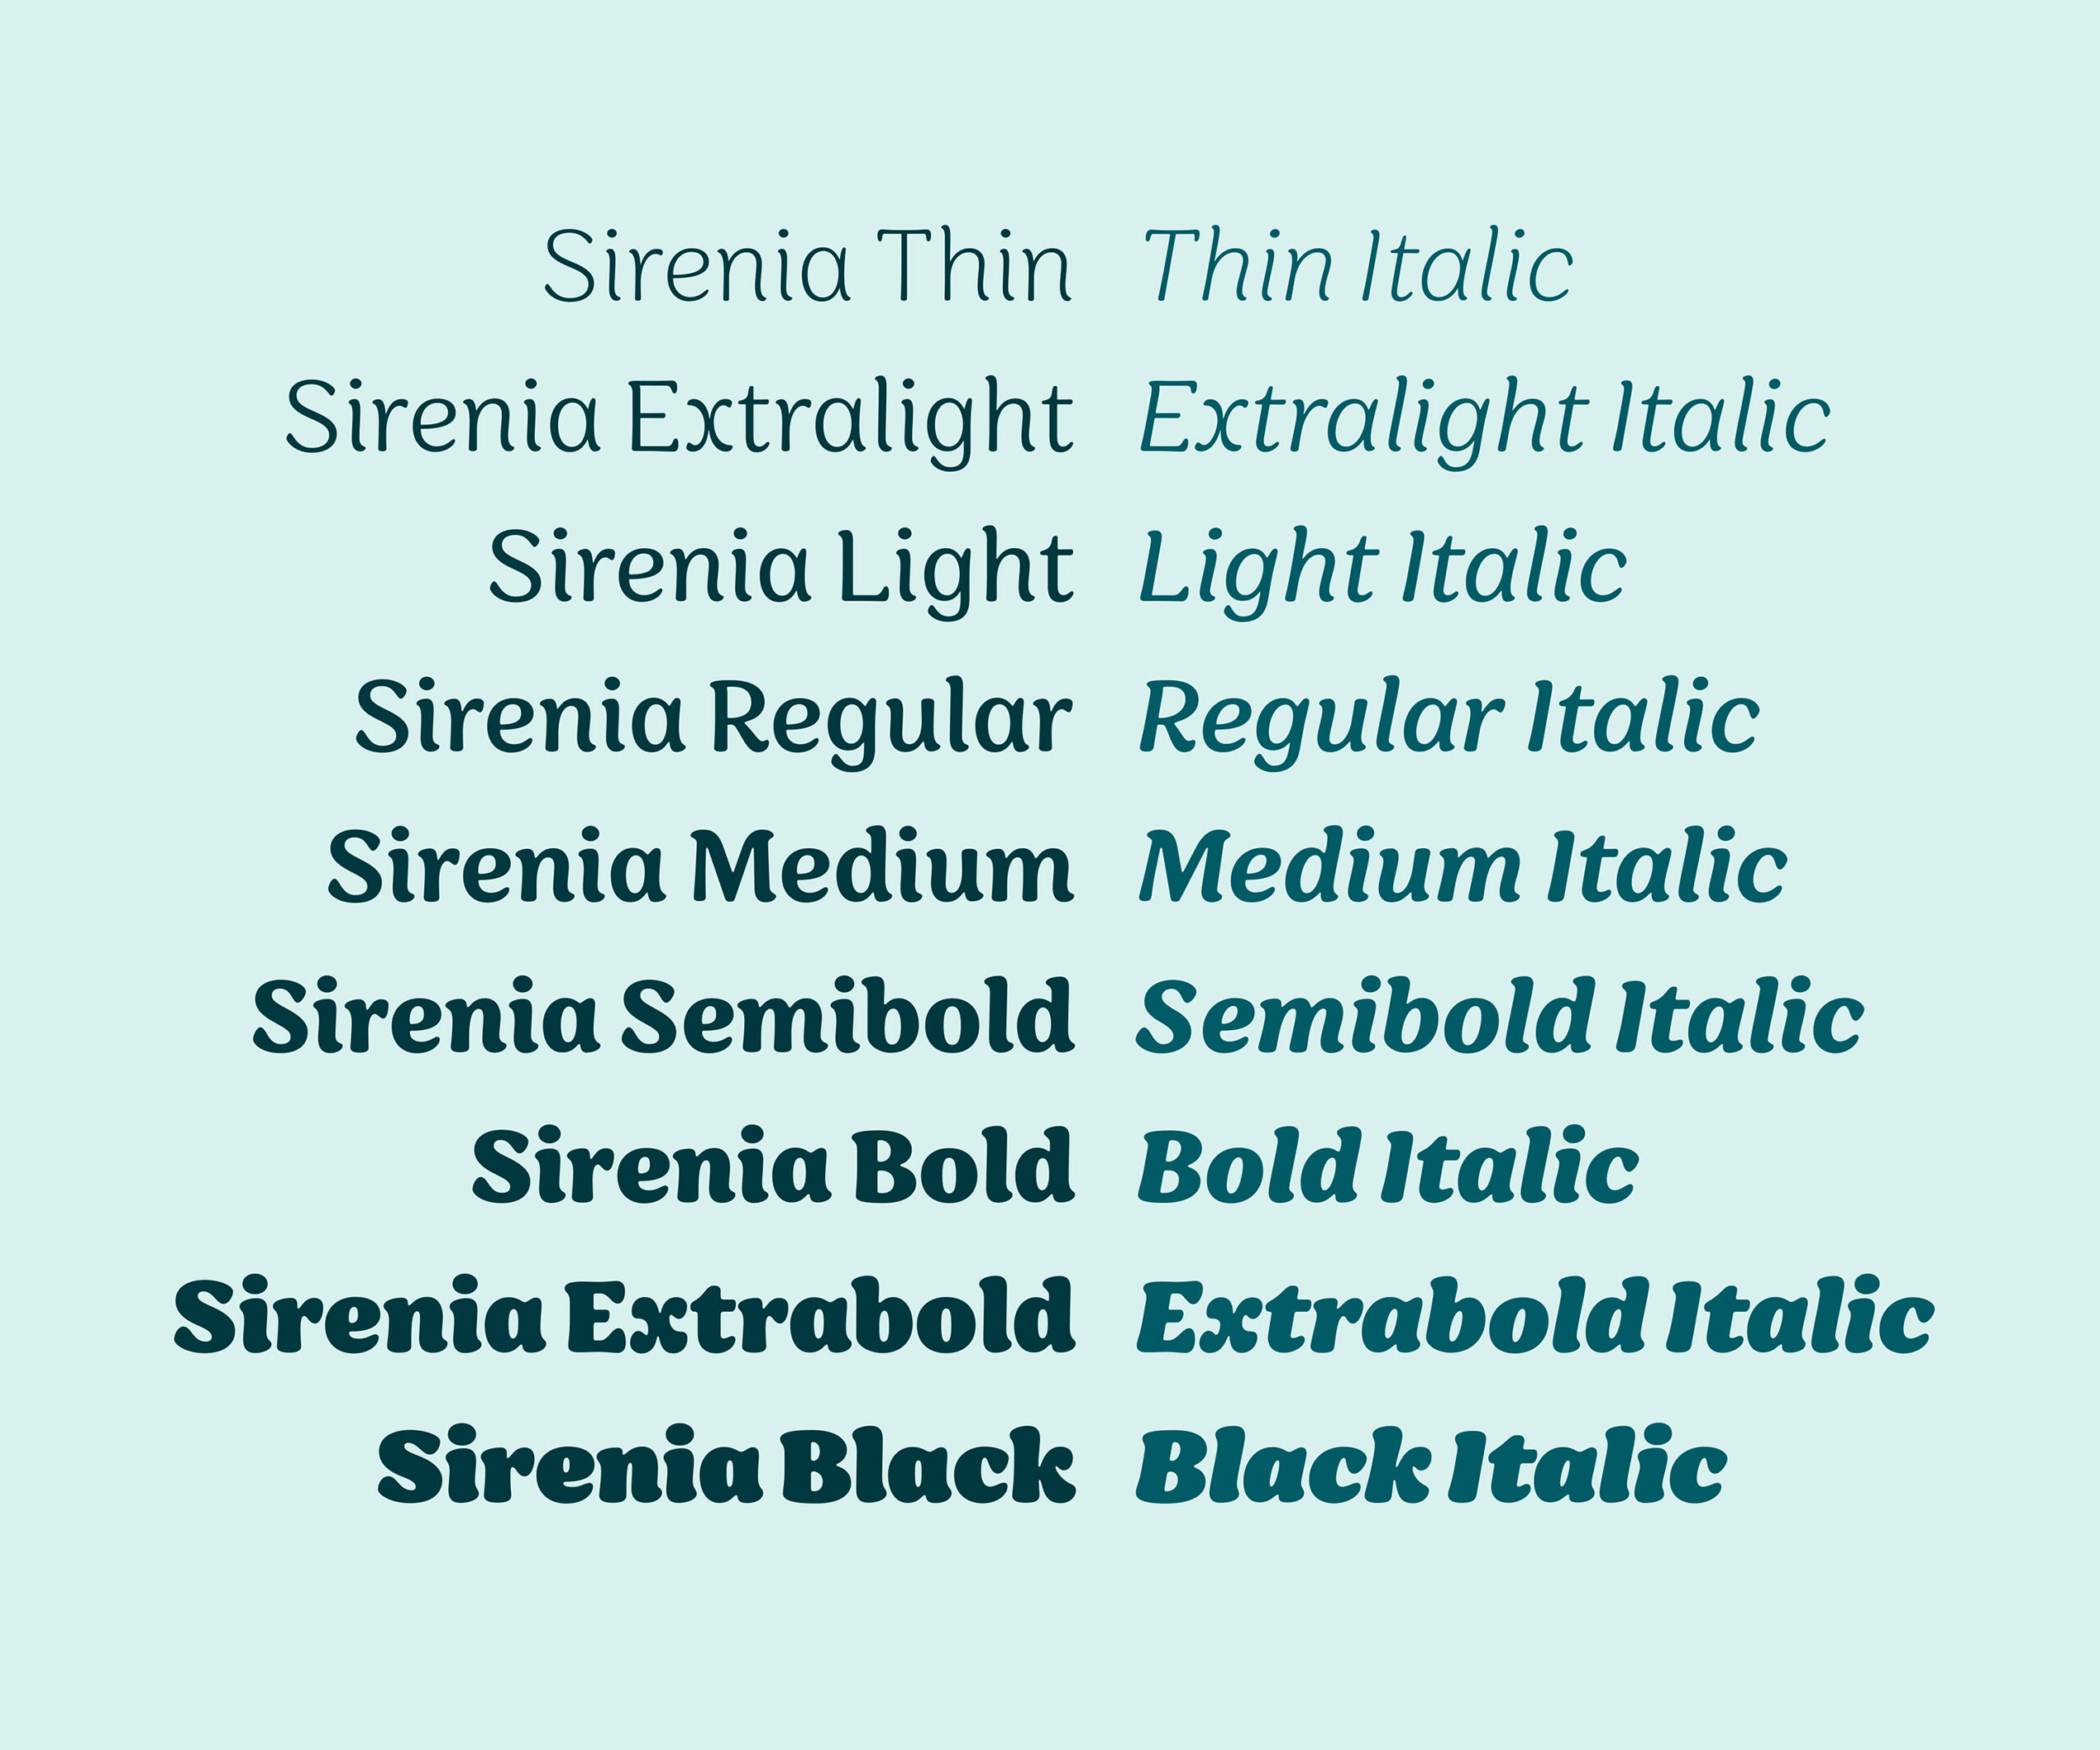 Sirenia Weights and Styles, Quelle: Floodfonts